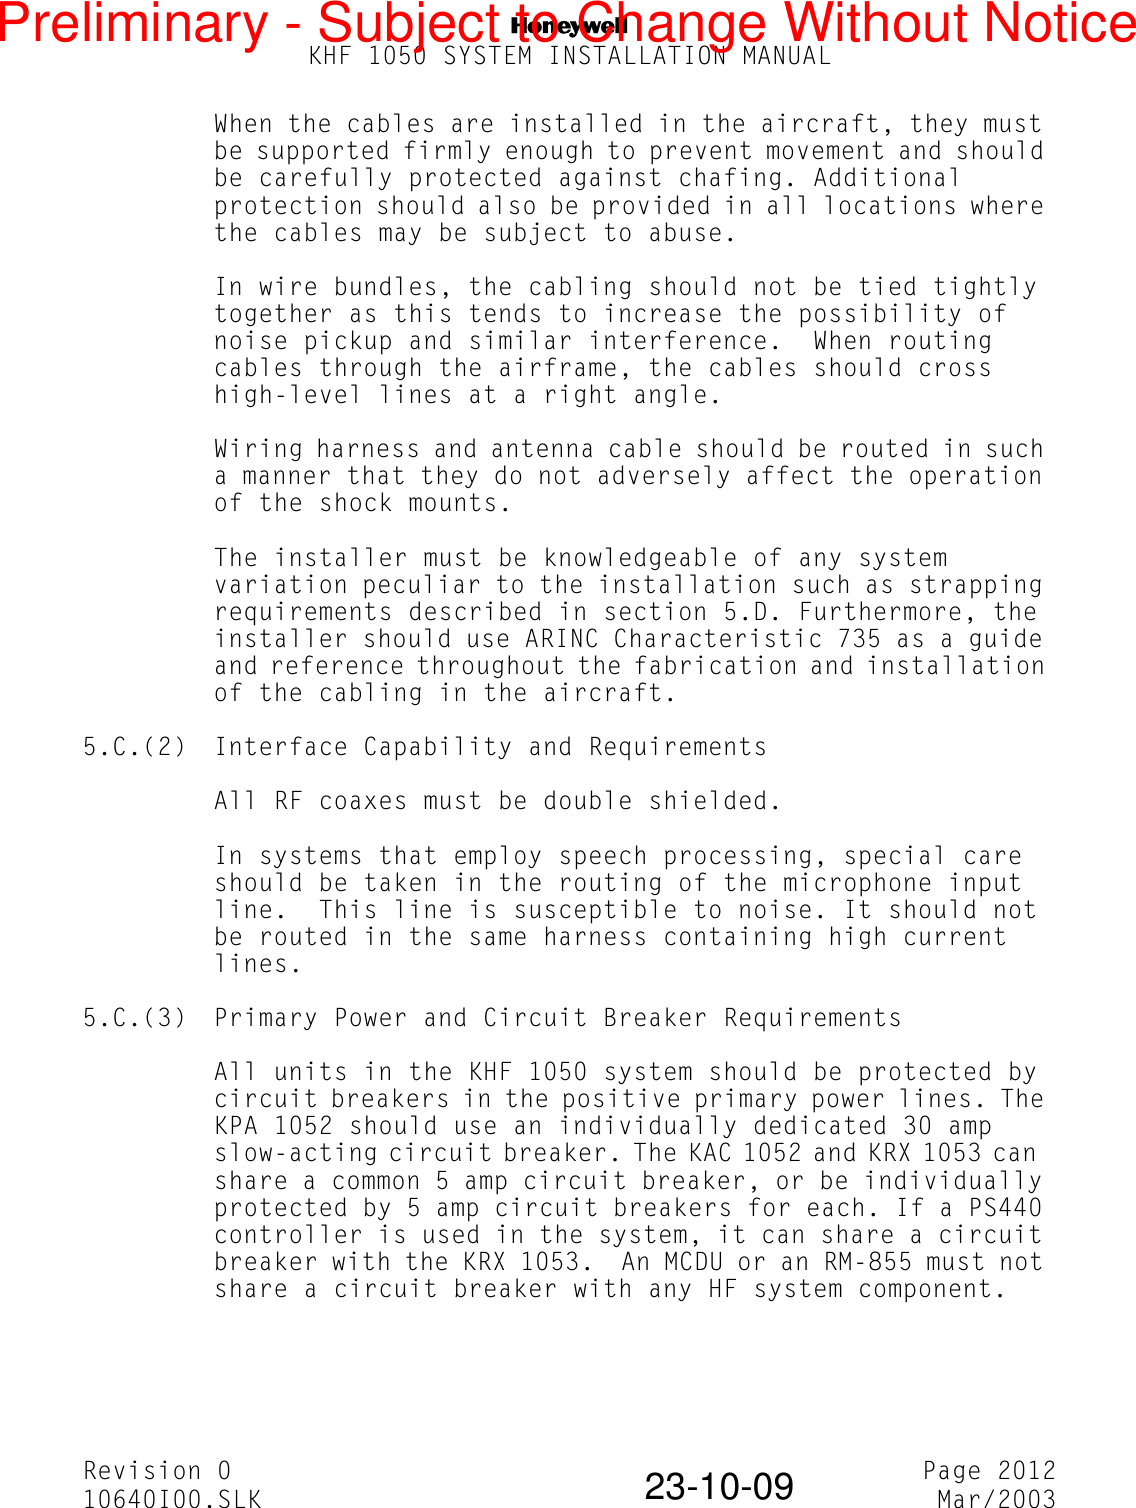 NKHF 1050 SYSTEM INSTALLATION MANUALRevision 0 Page 201210640I00.SLK Mar/200323-10-09When the cables are installed in the aircraft, they must be supported firmly enough to prevent movement and should be carefully protected against chafing. Additional protection should also be provided in all locations where the cables may be subject to abuse.In wire bundles, the cabling should not be tied tightly together as this tends to increase the possibility of noise pickup and similar interference.  When routing cables through the airframe, the cables should cross high-level lines at a right angle.Wiring harness and antenna cable should be routed in such a manner that they do not adversely affect the operation of the shock mounts.The installer must be knowledgeable of any system variation peculiar to the installation such as strapping requirements described in section 5.D. Furthermore, the installer should use ARINC Characteristic 735 as a guide and reference throughout the fabrication and installation of the cabling in the aircraft.5.C.(2) Interface Capability and RequirementsAll RF coaxes must be double shielded.In systems that employ speech processing, special care should be taken in the routing of the microphone input line.  This line is susceptible to noise. It should not be routed in the same harness containing high current lines.5.C.(3) Primary Power and Circuit Breaker RequirementsAll units in the KHF 1050 system should be protected by circuit breakers in the positive primary power lines. The KPA 1052 should use an individually dedicated 30 amp slow-acting circuit breaker. The KAC 1052 and KRX 1053 can  share a common 5 amp circuit breaker, or be individually protected by 5 amp circuit breakers for each. If a PS440 controller is used in the system, it can share a circuit breaker with the KRX 1053.  An MCDU or an RM-855 must not share a circuit breaker with any HF system component.Preliminary - Subject to Change Without Notice